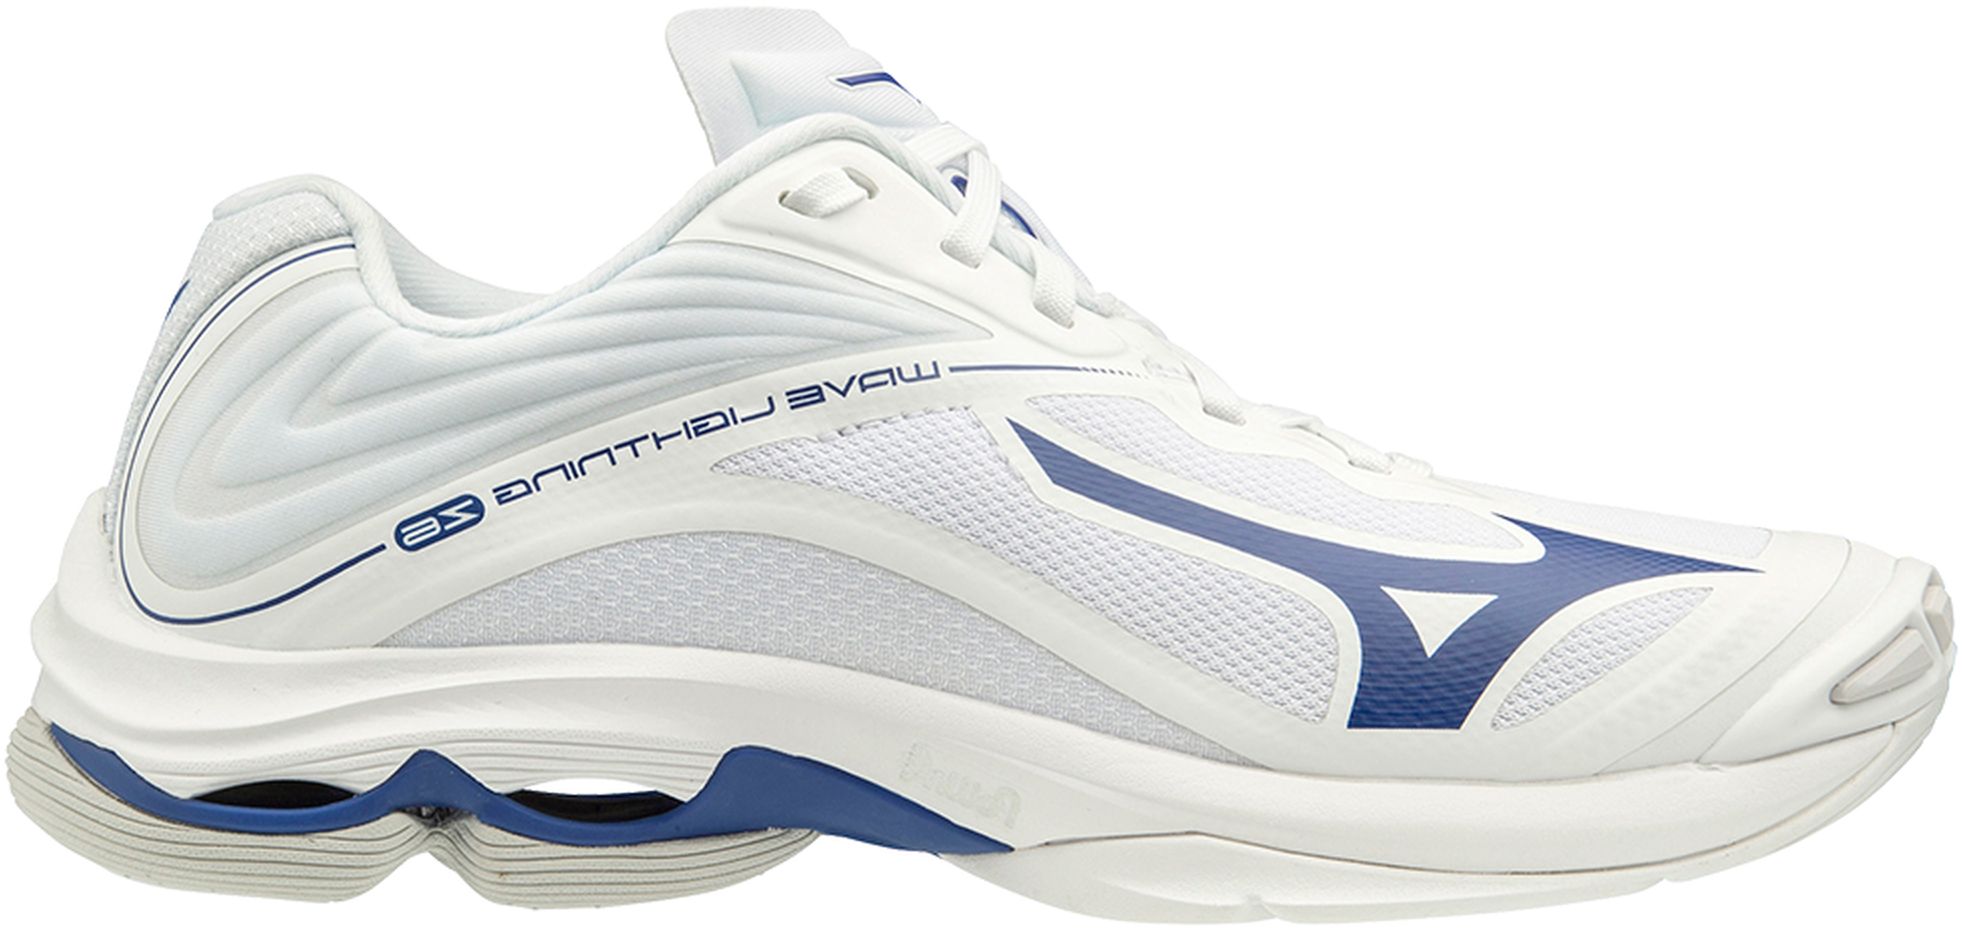 Wave Lightning Z6 Volleyball Shoes 